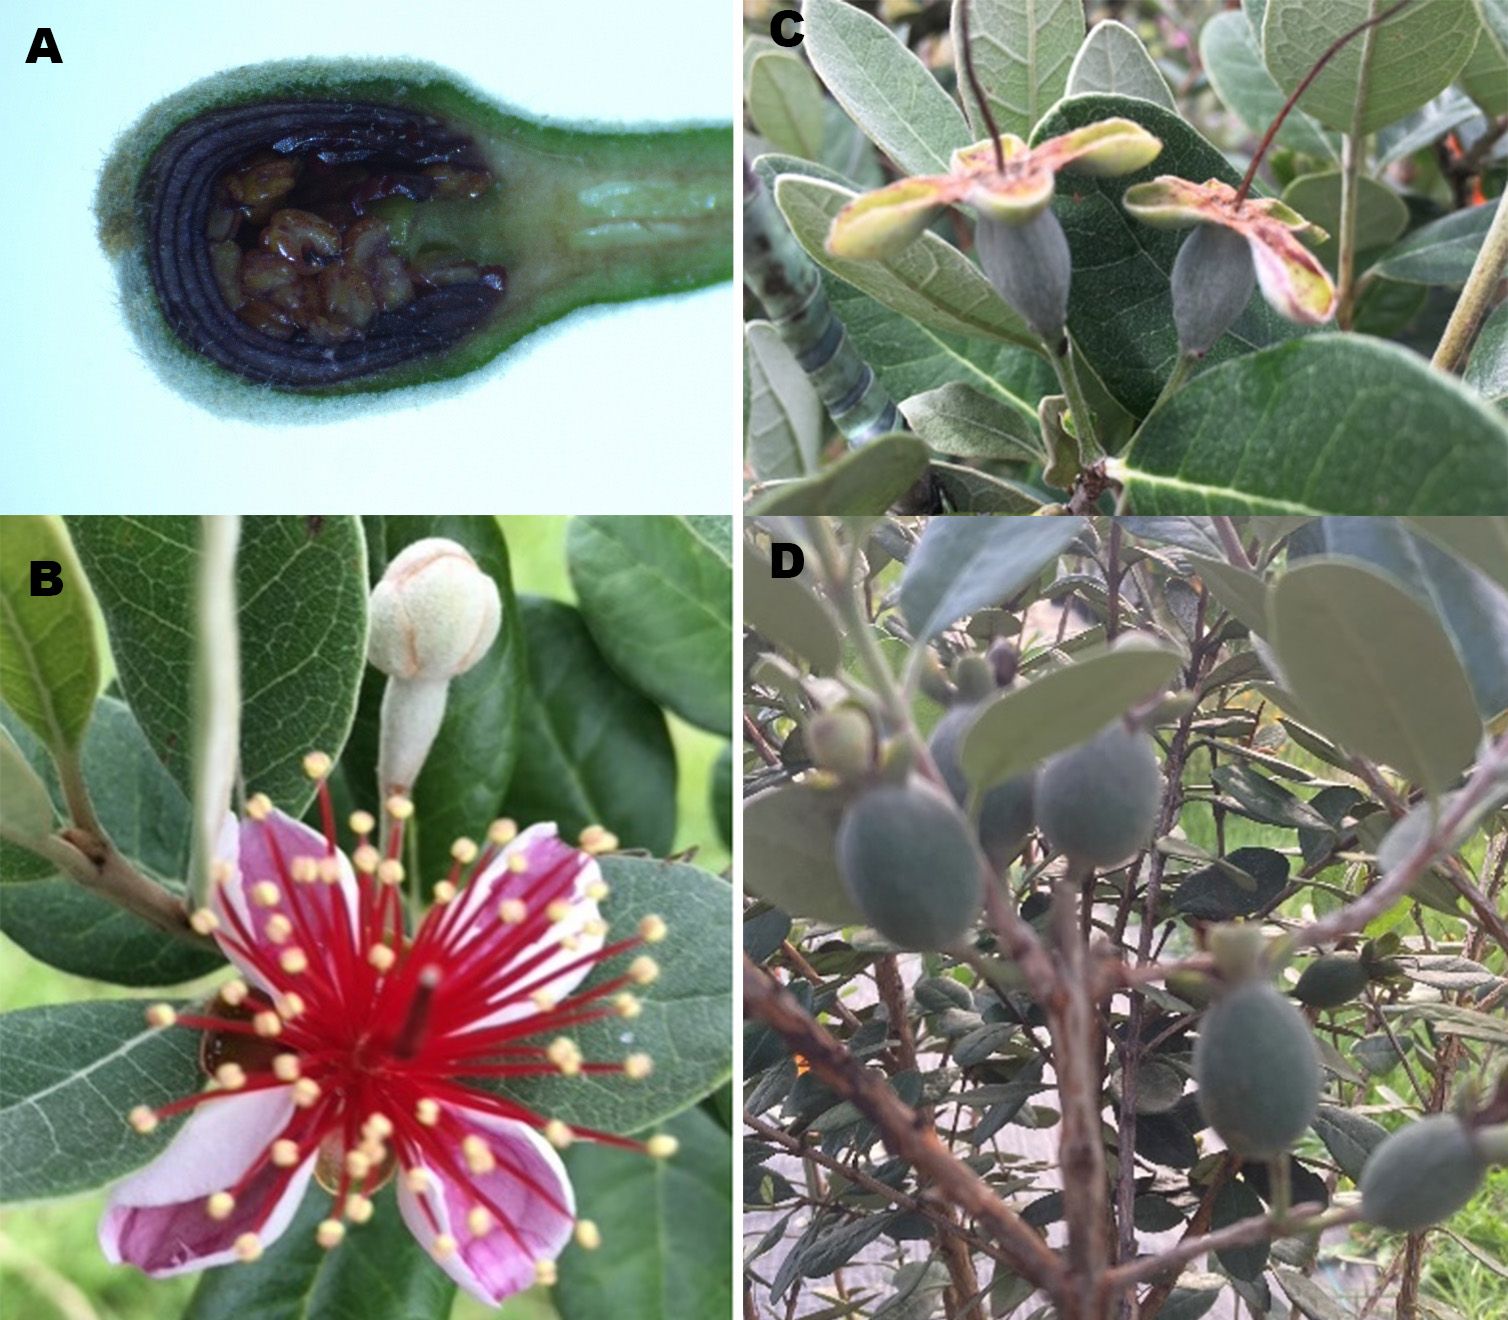 Feijoa bud, flowers, and fruit. (A) Developing feijoa flower bud (mid-March; microscopic photo). (B) Feijoa flowers are showy, fragrant, and taste like strawberry and pineapple (mid-April). (C) Feijoa fruits begin developing shortly after flower senescence (mid-May). (D) Developing feijoa fruits growing in clusters (mid-June). 